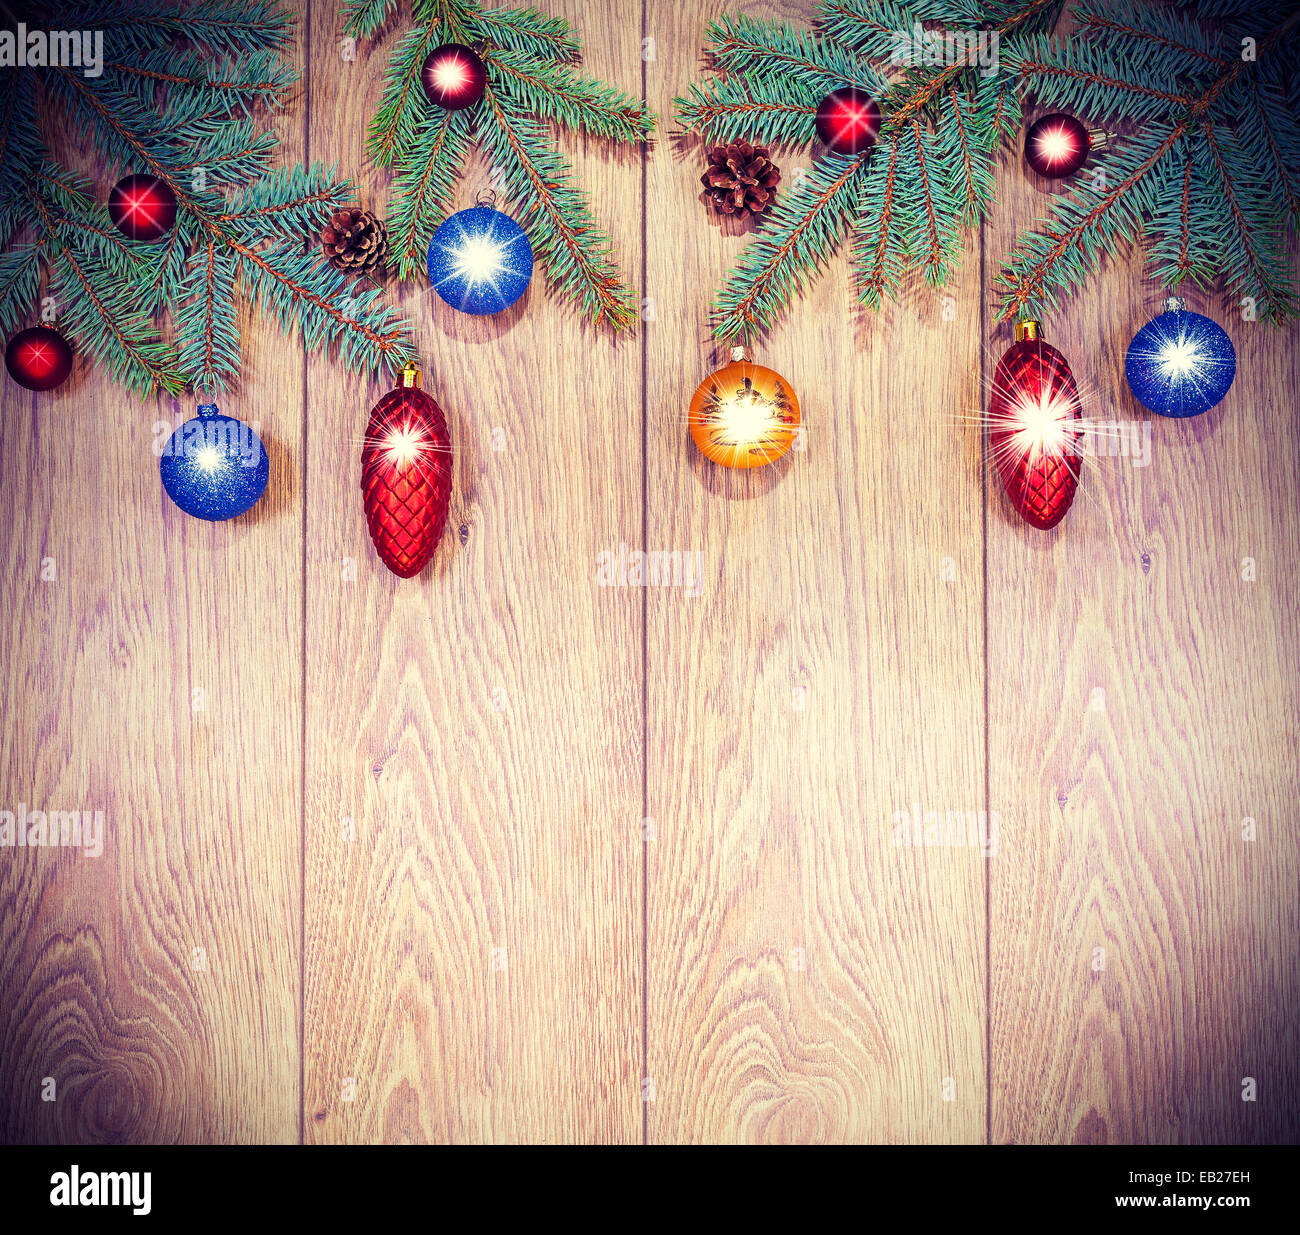 Vintage christmas background, decoration a wooden board Stock Photo - Alamy